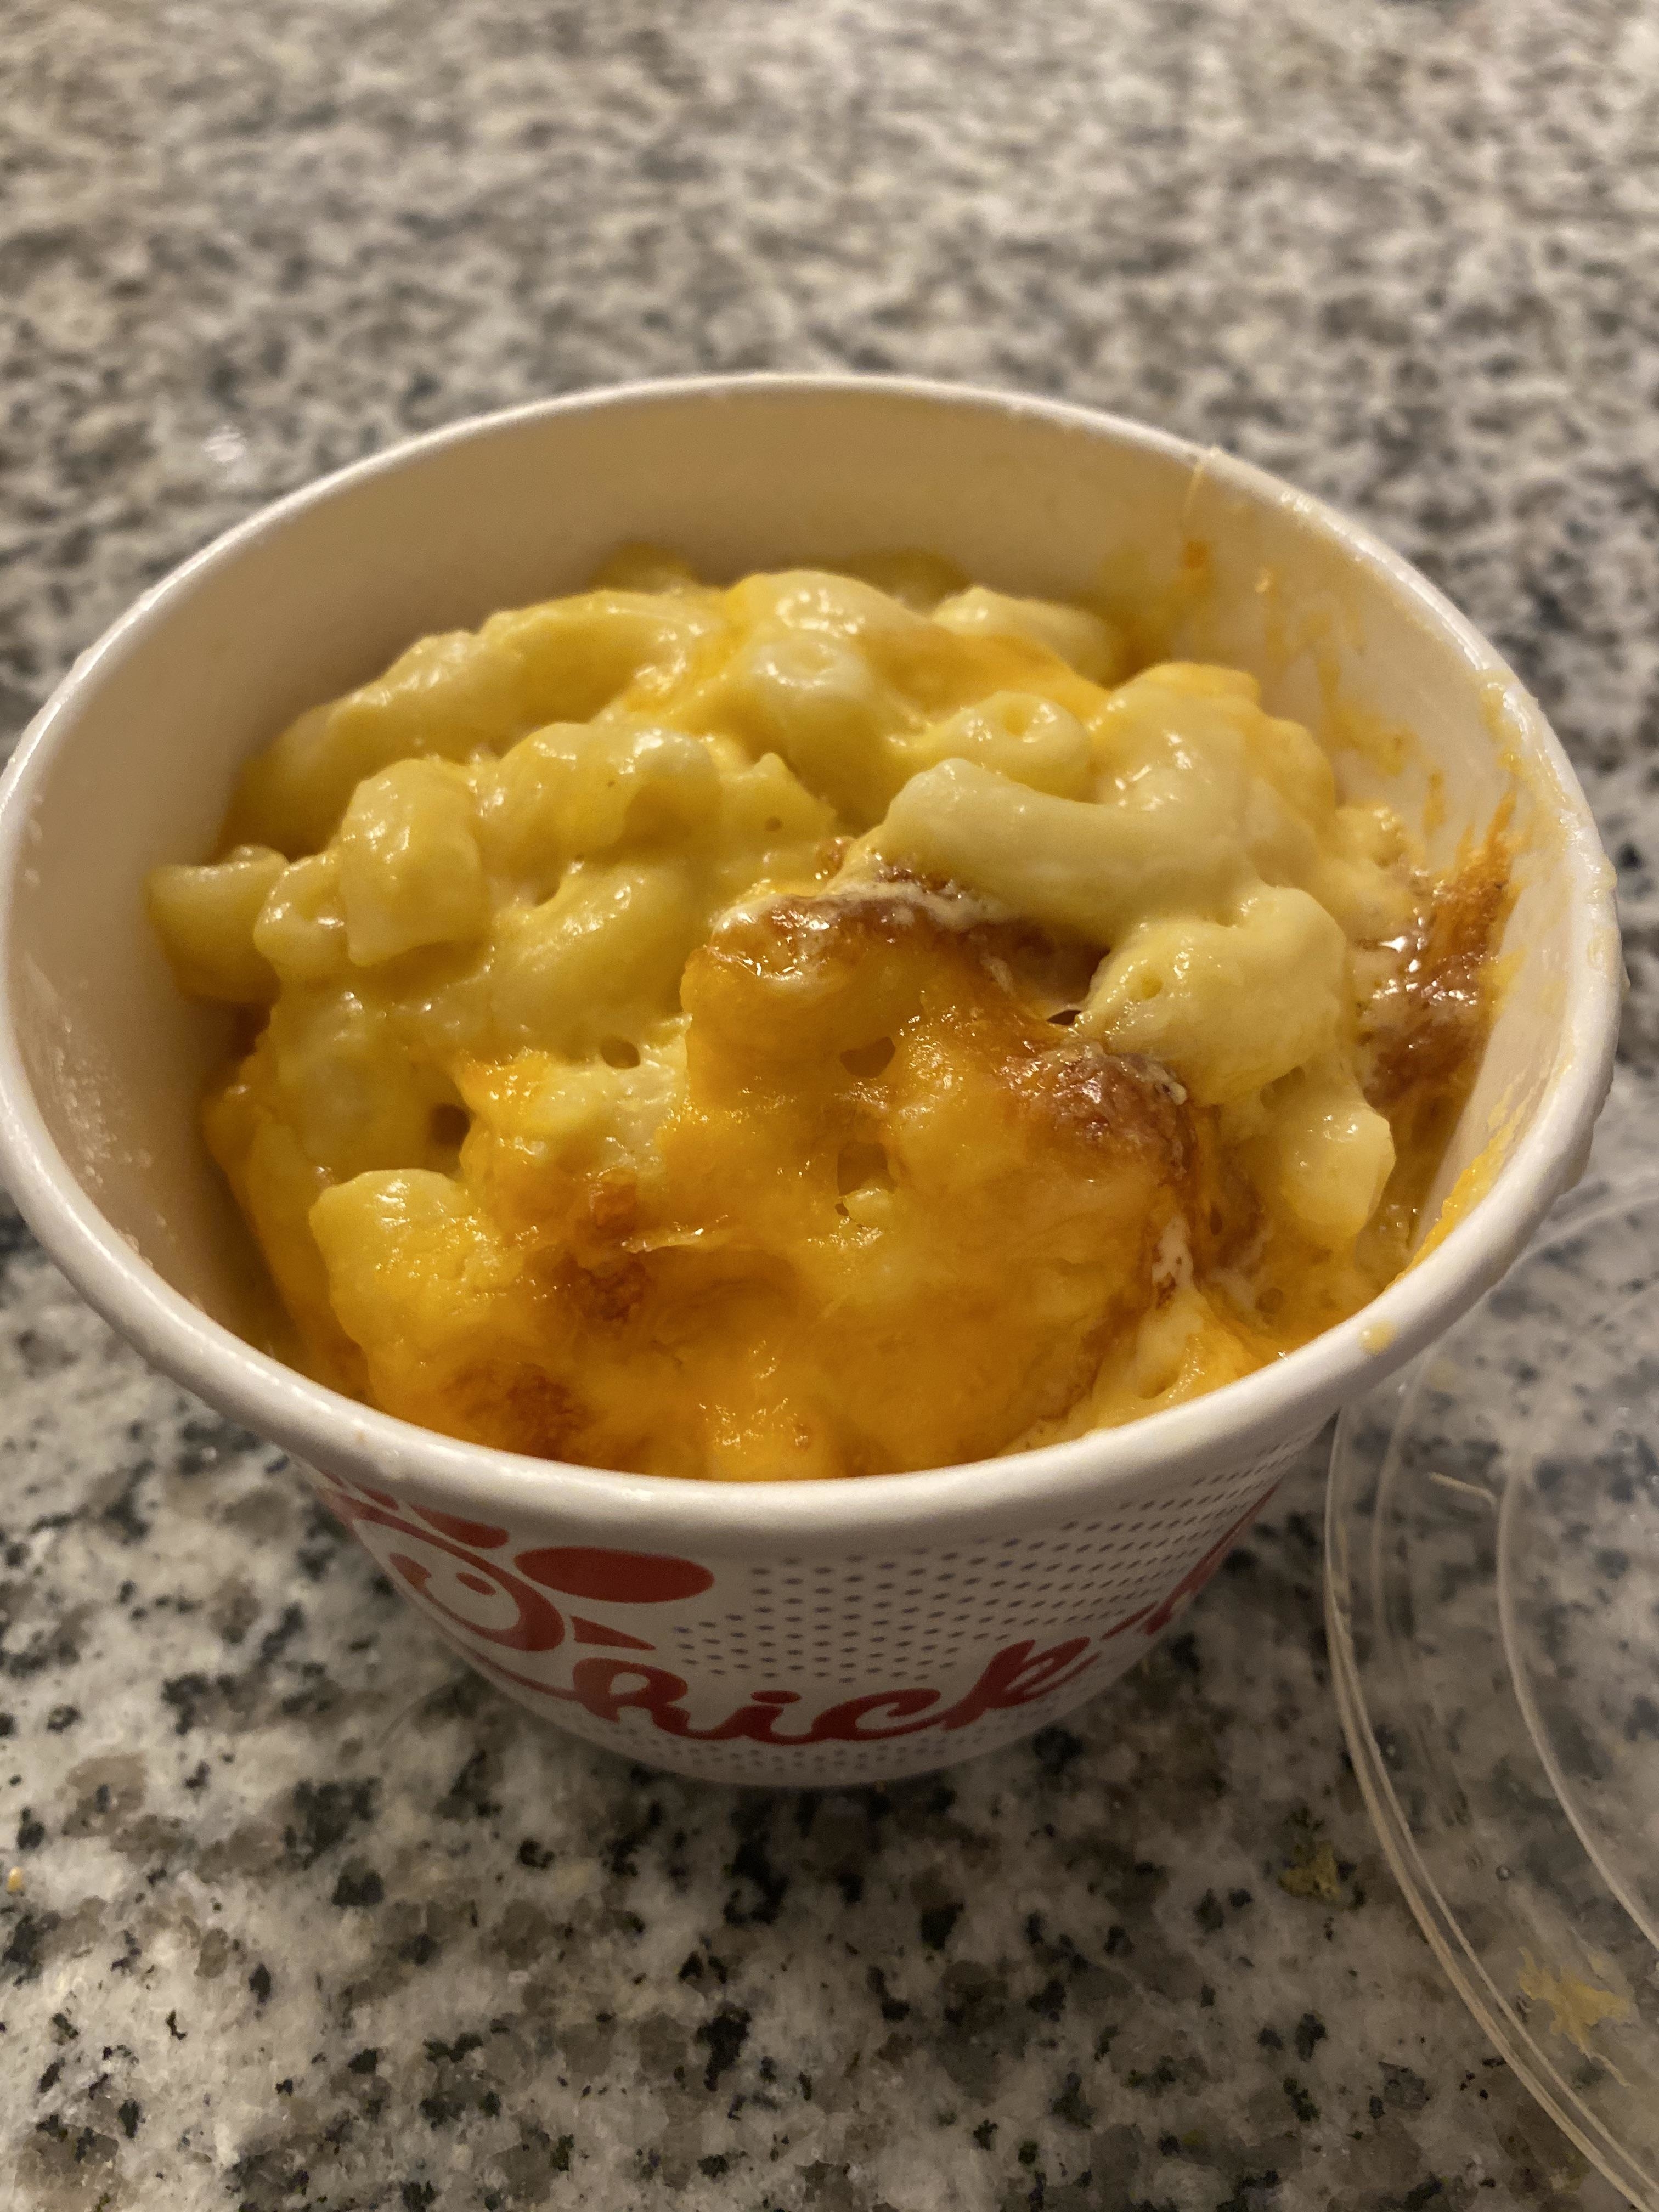 A bowl of creamy macaroni and cheese on a speckled countertop